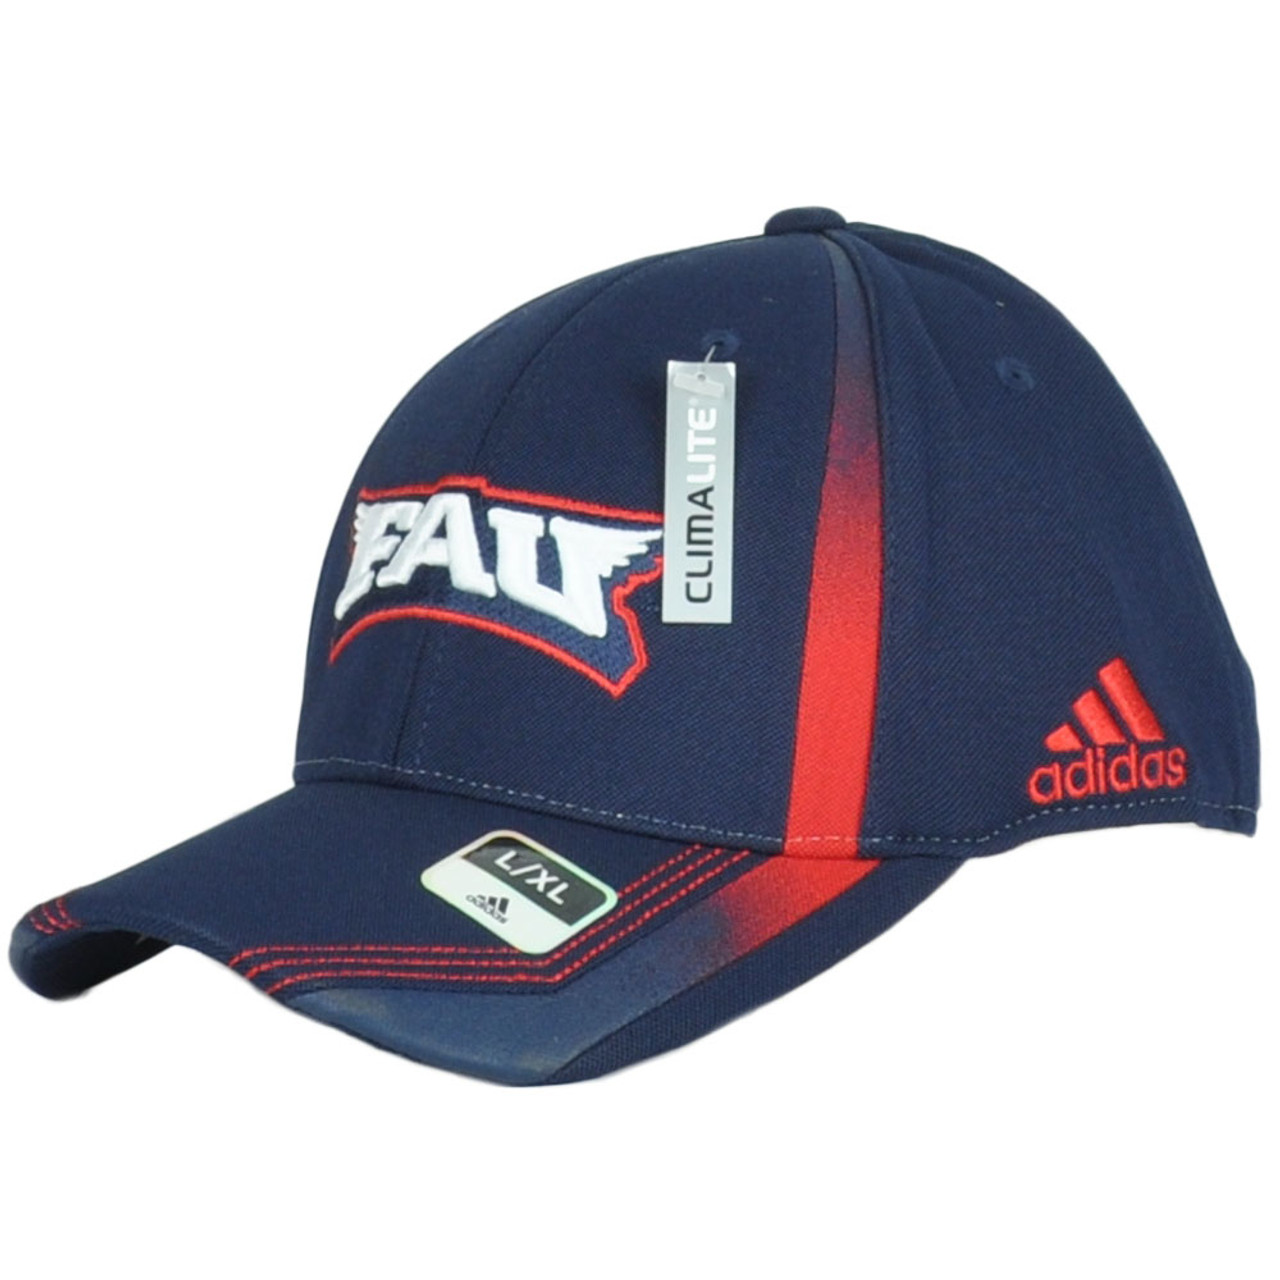  adidas NBA New Orleans Pelicans Mens Structured Flex Hat, Red :  Sports & Outdoors